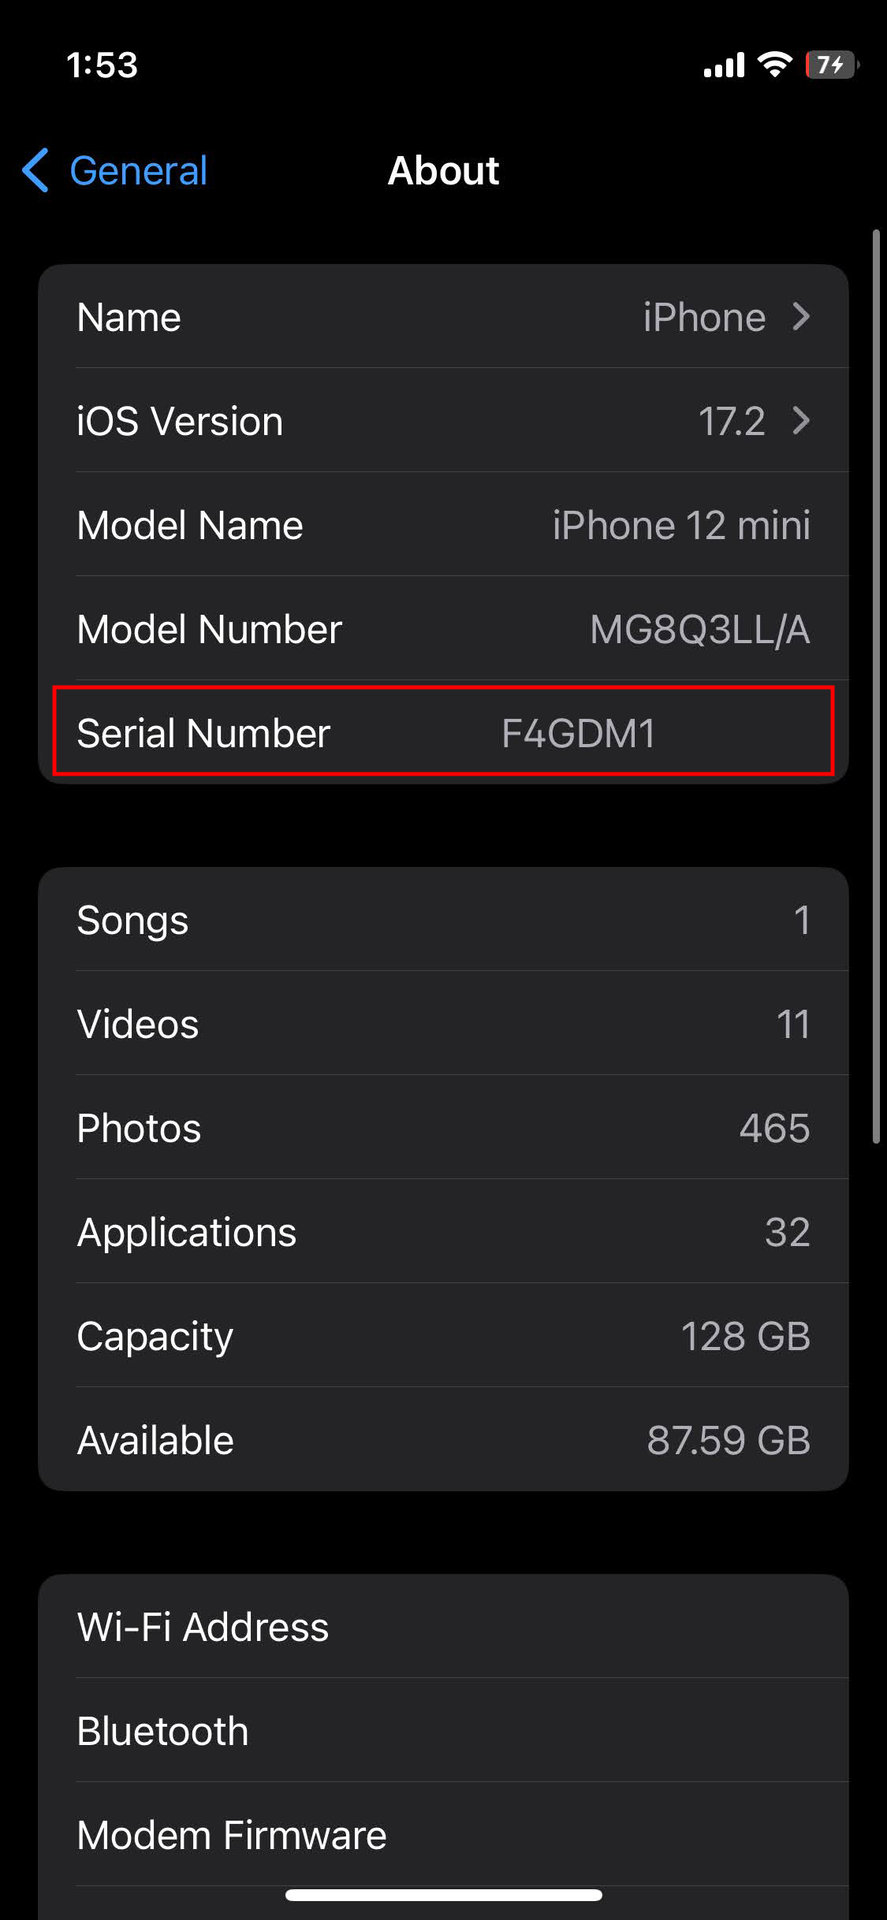 How Do I Find the Serial Number on My Android Phone?